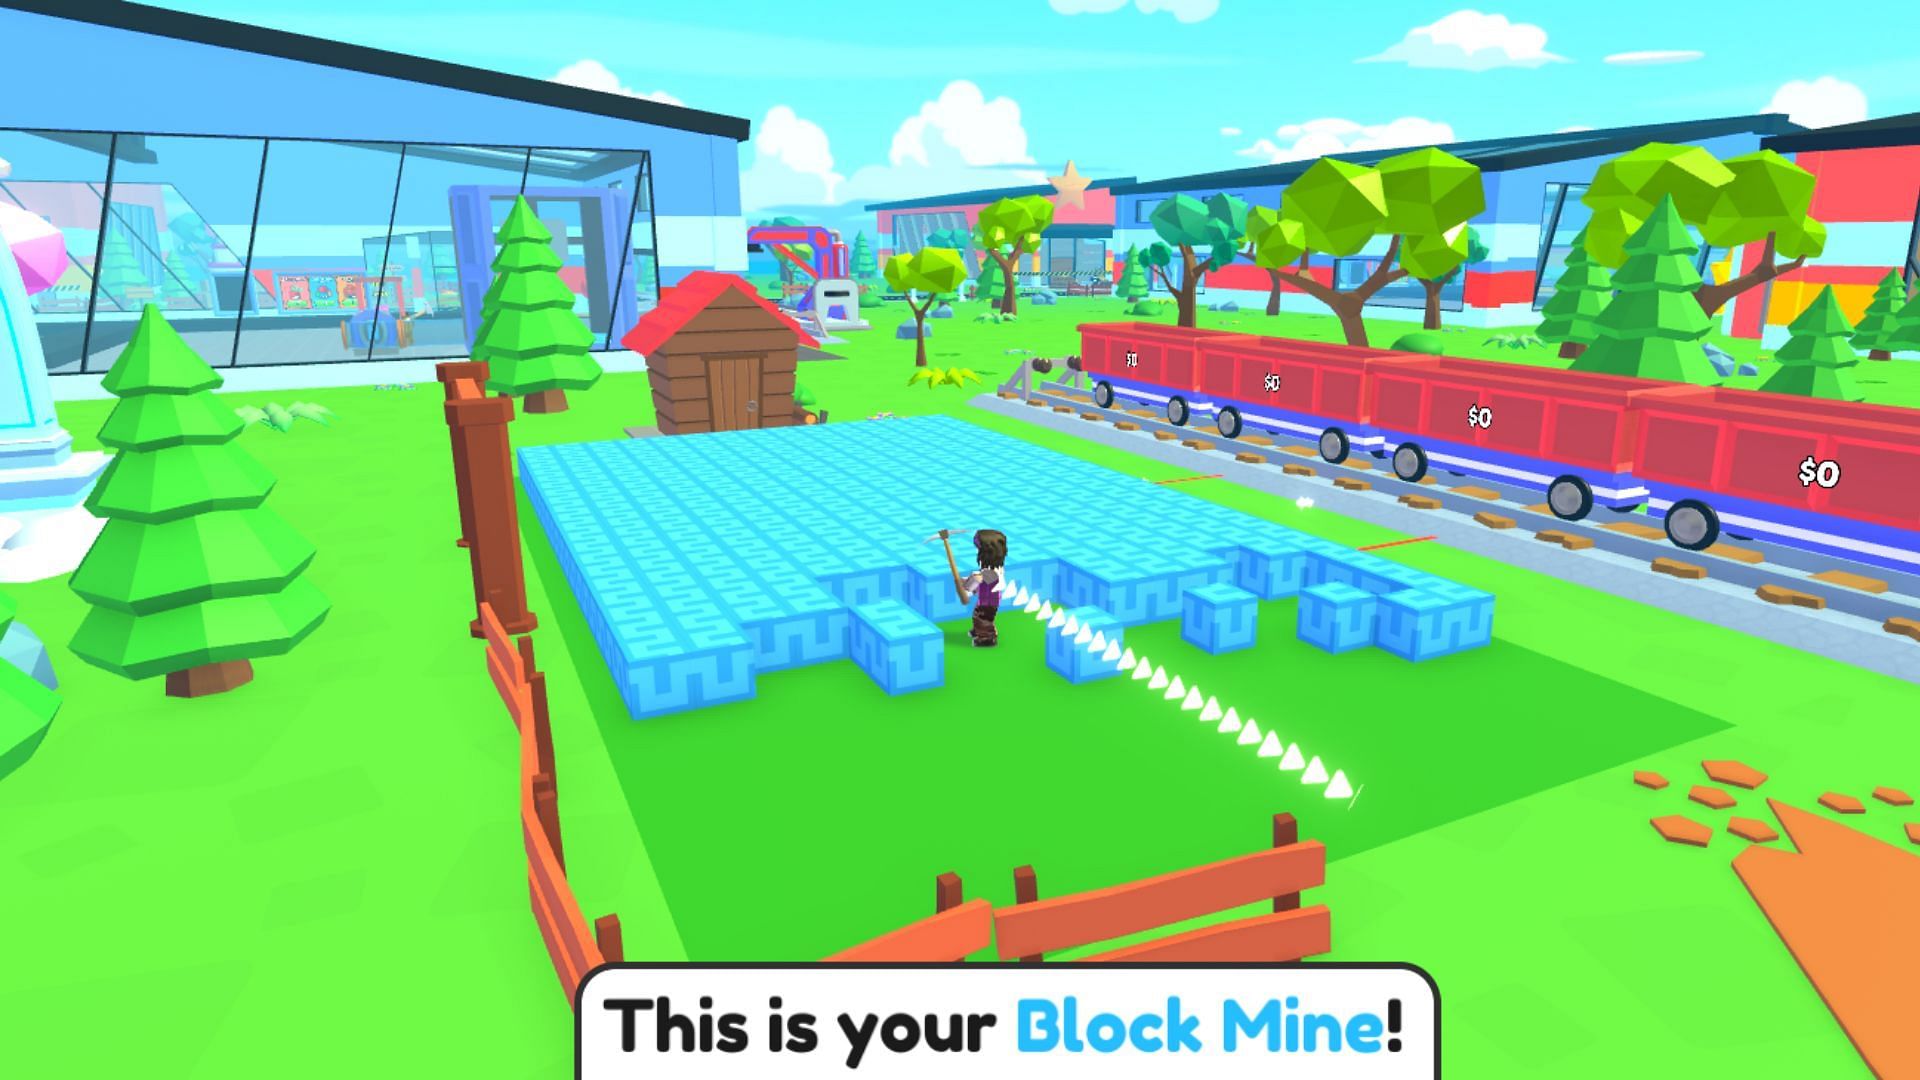 Own your Block Mine in Build a Factory (Image via Roblox)